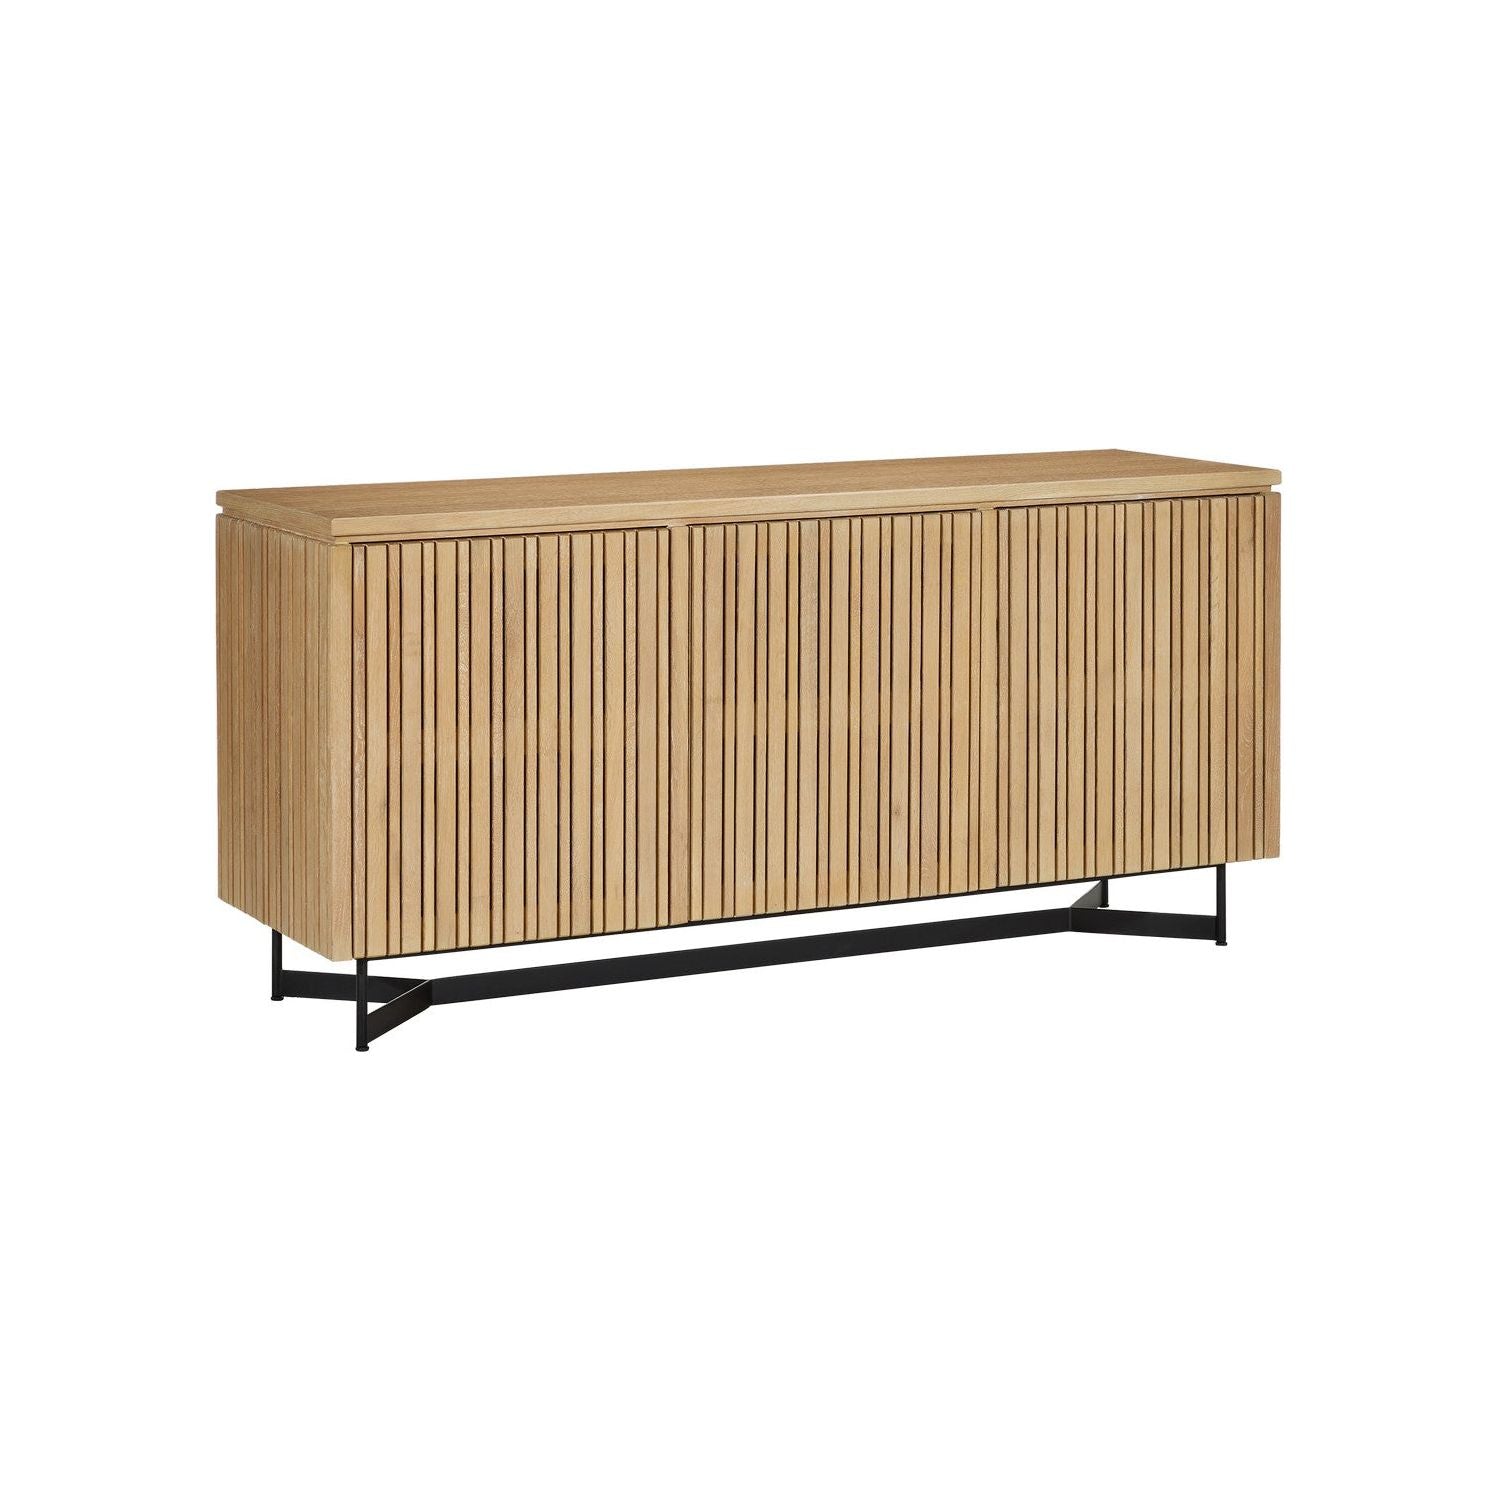 Currey and Company - 3000-0294 - Credenza - Washed Oak/Black